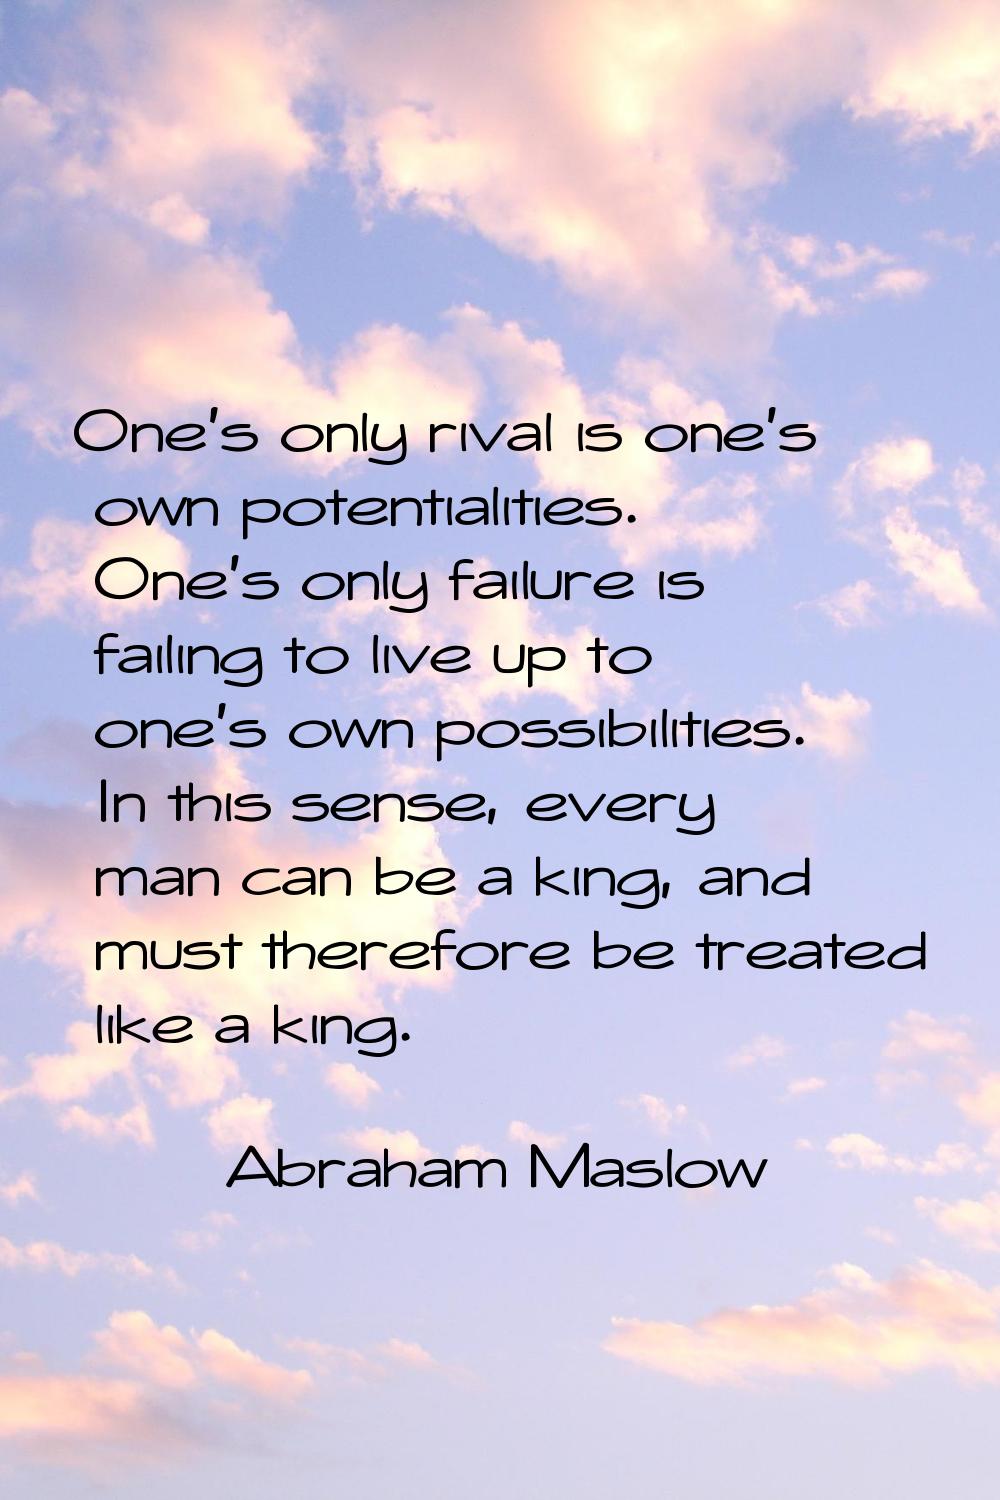 One's only rival is one's own potentialities. One's only failure is failing to live up to one's own